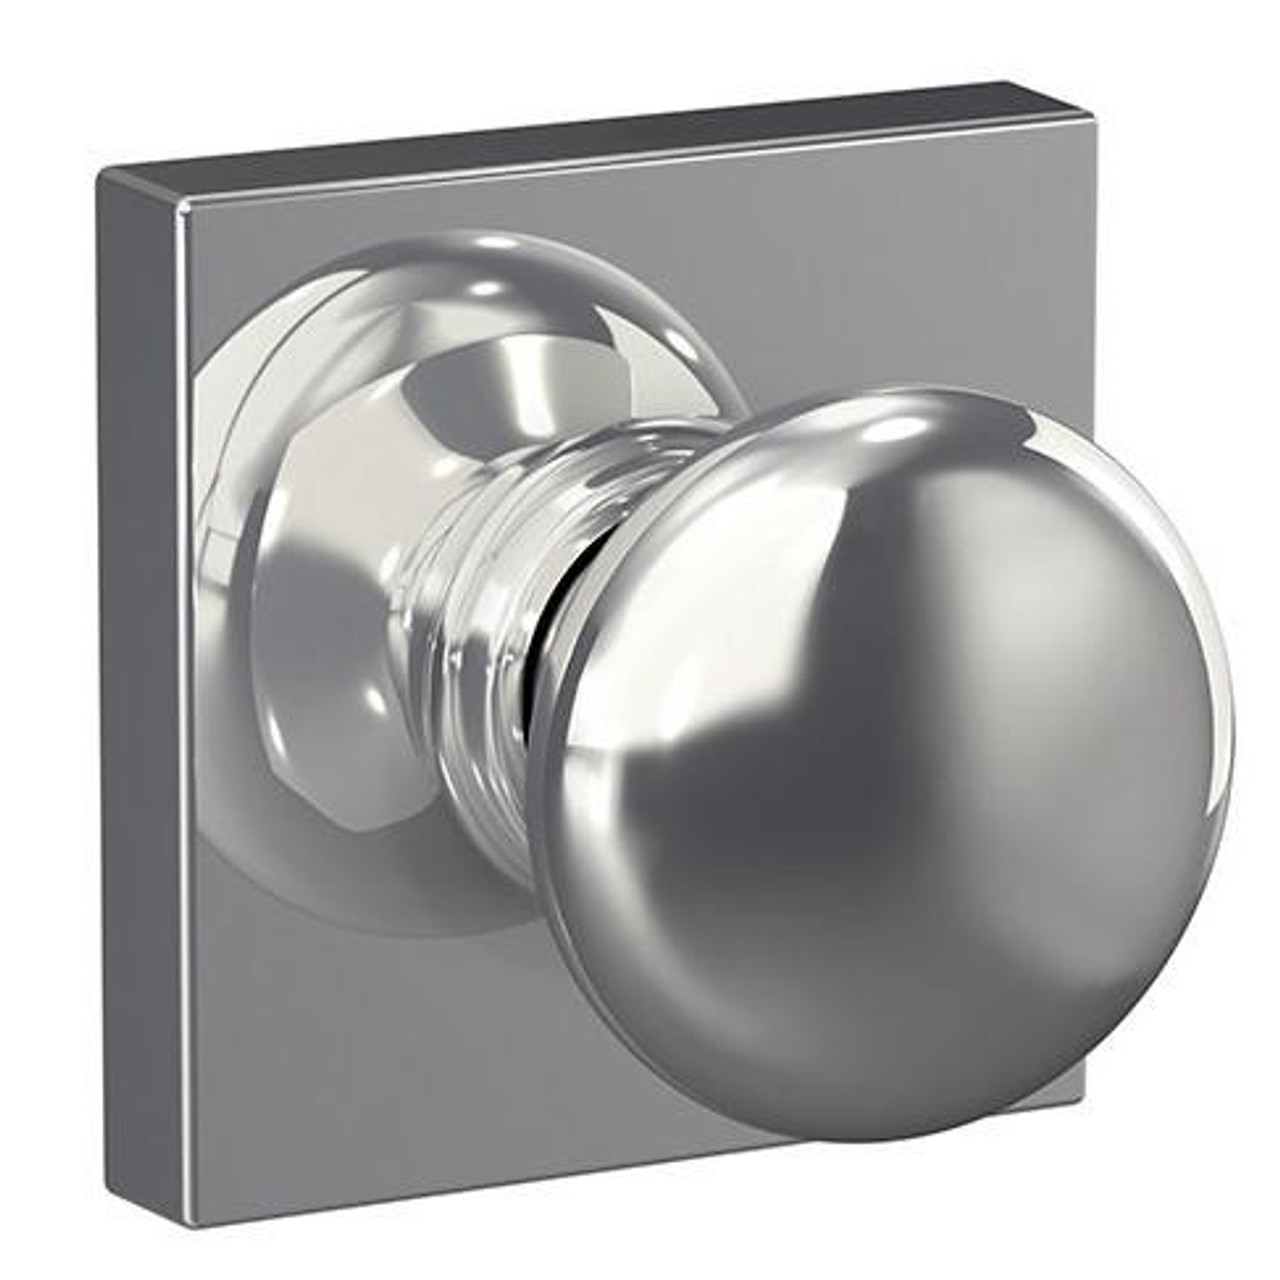  Schlage Lock F-Series Passage Knob Plymouth Series with a Collins Rosette 